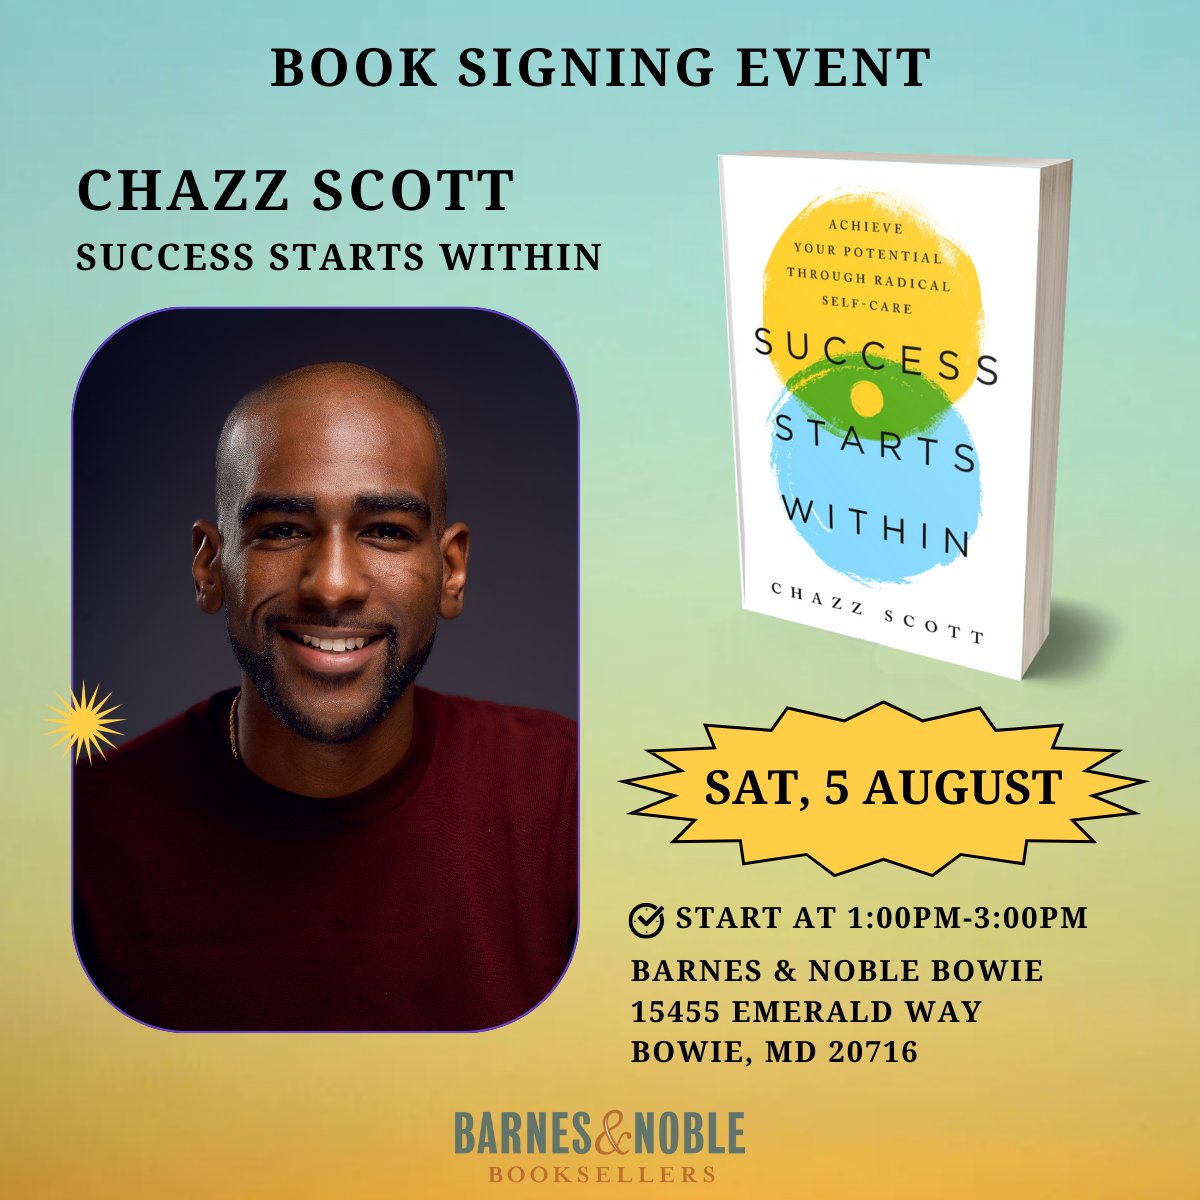 Super excited to announce my upcoming book event for Success Starts Within! I'll be doing a reading, Q&A, and you'll get a signed copy of the book.

So, let's embark on this transformative adventure together! Hope to see you there. #SuccessStartsWithin #RadicalSelfCare